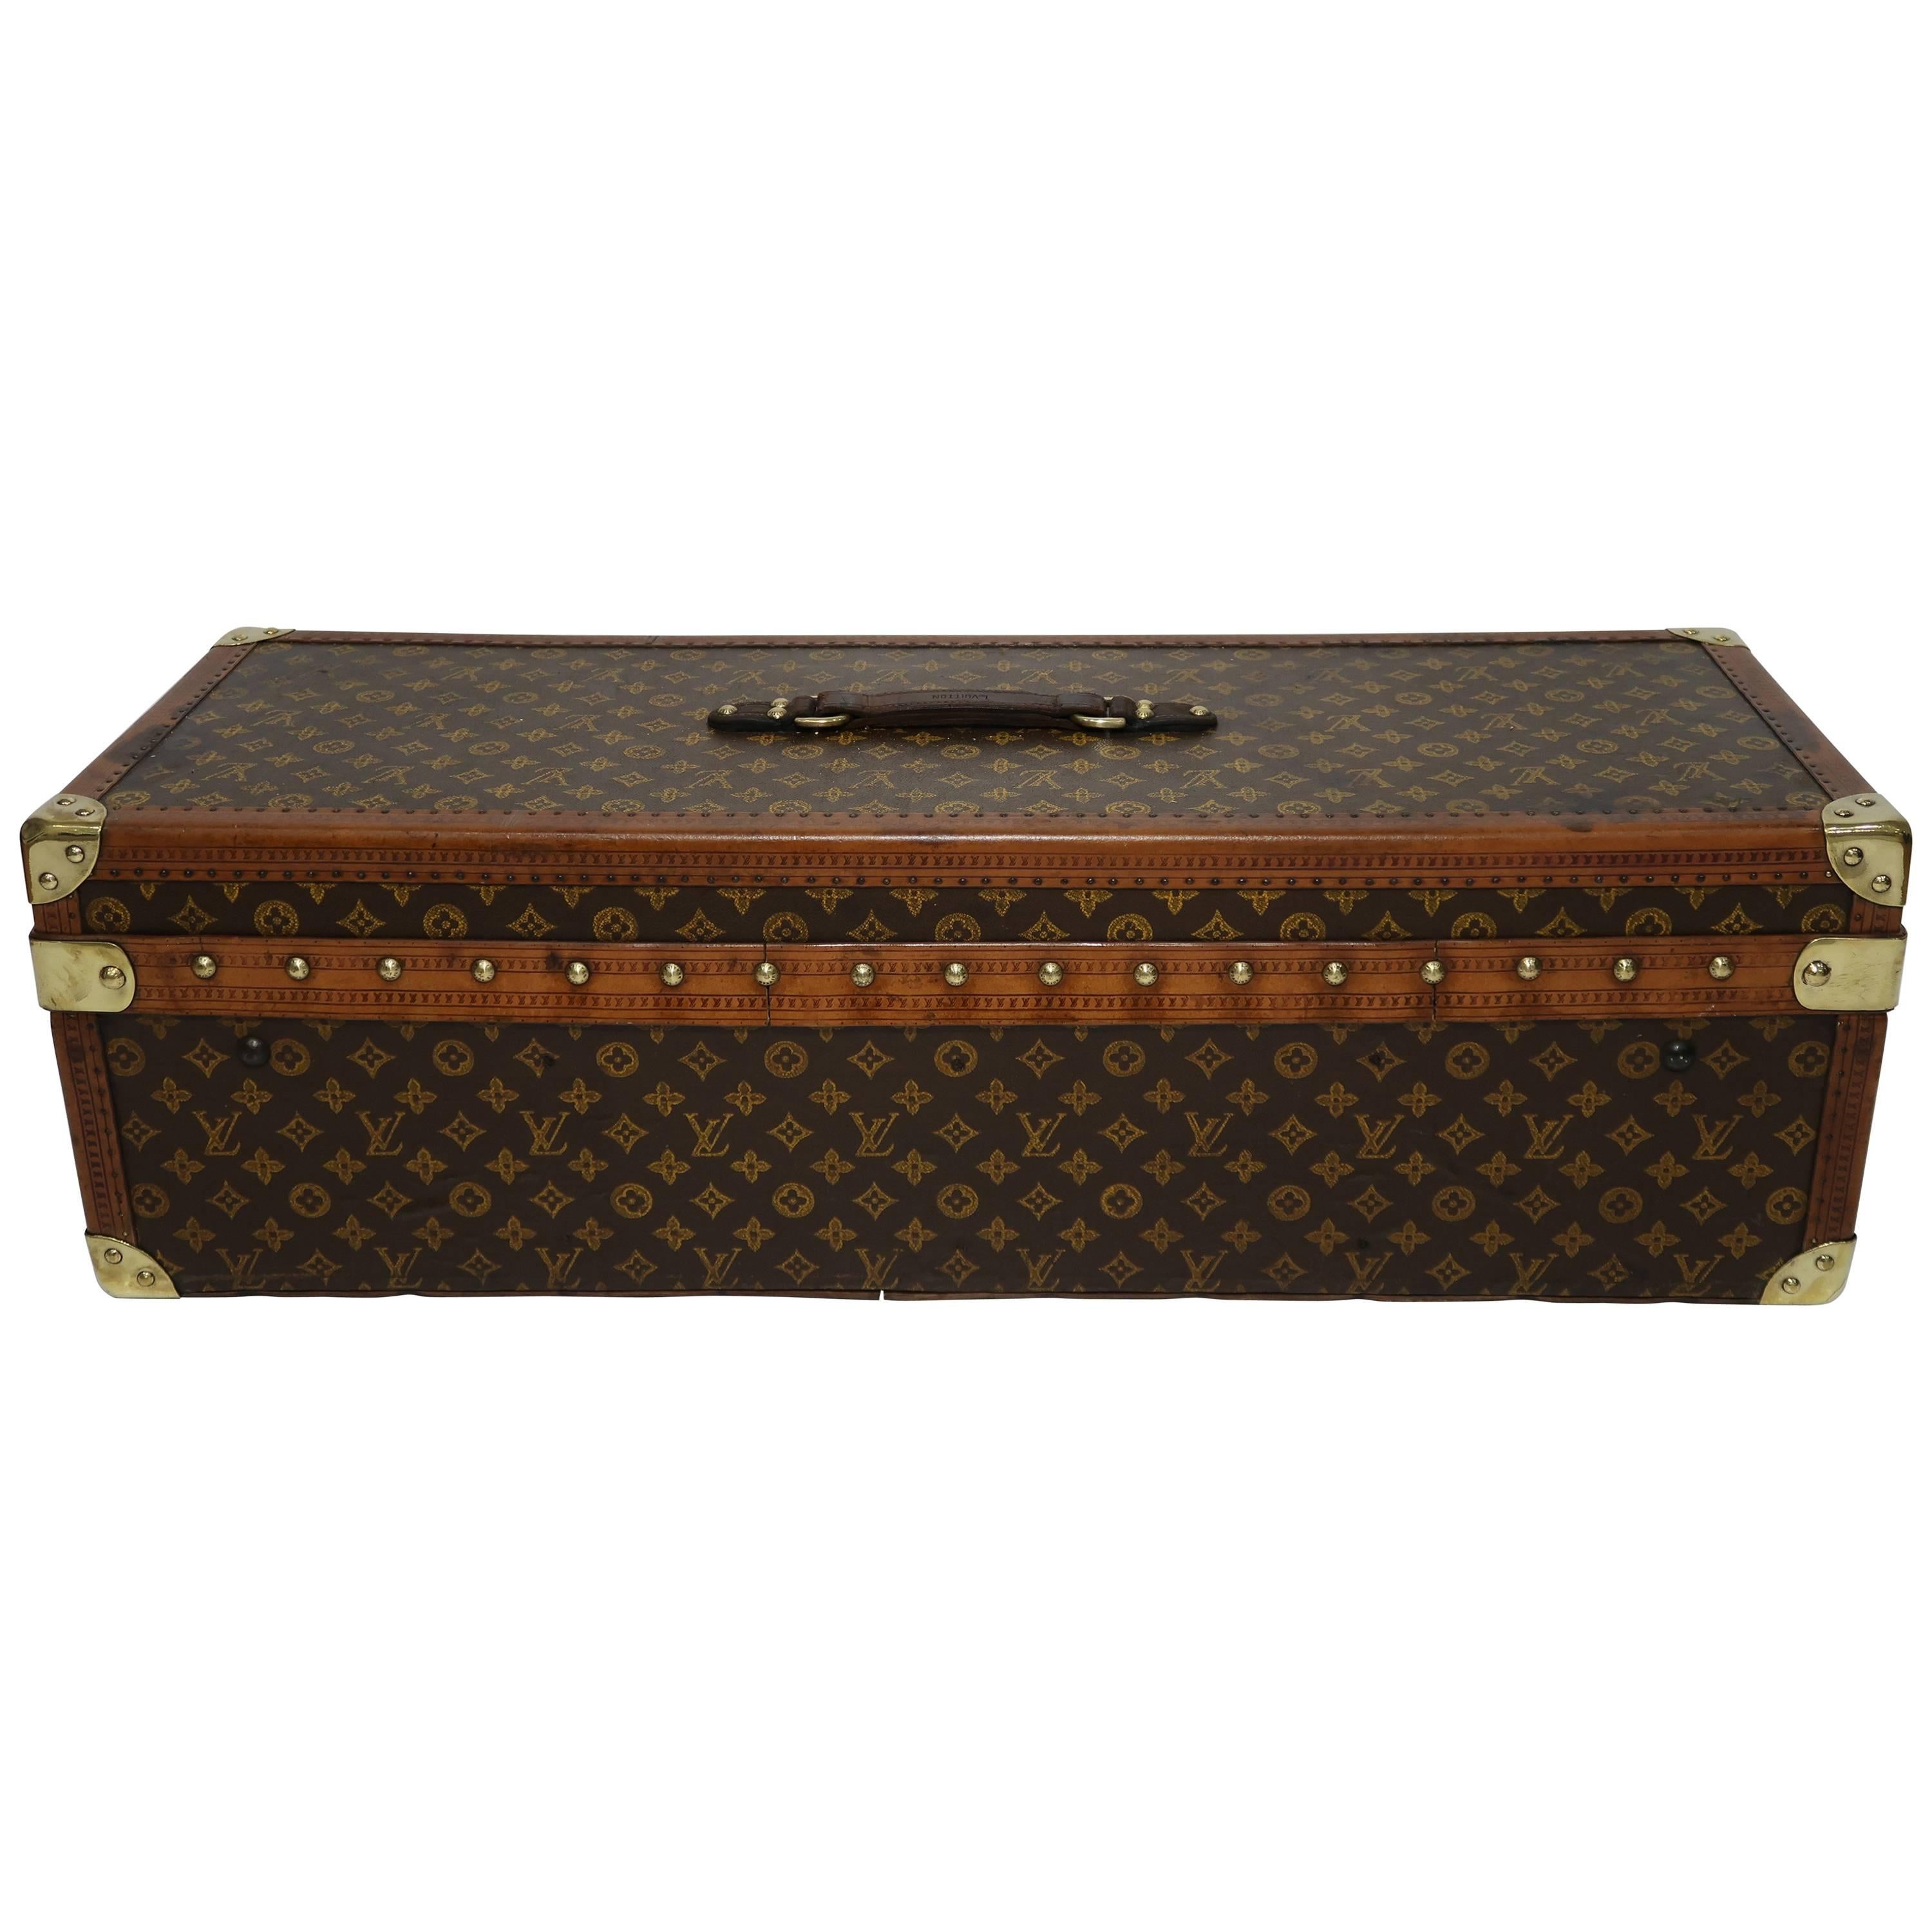 Princess's Louis Vuitton trunk travels to $8,204 in Lincoln, UK, sale